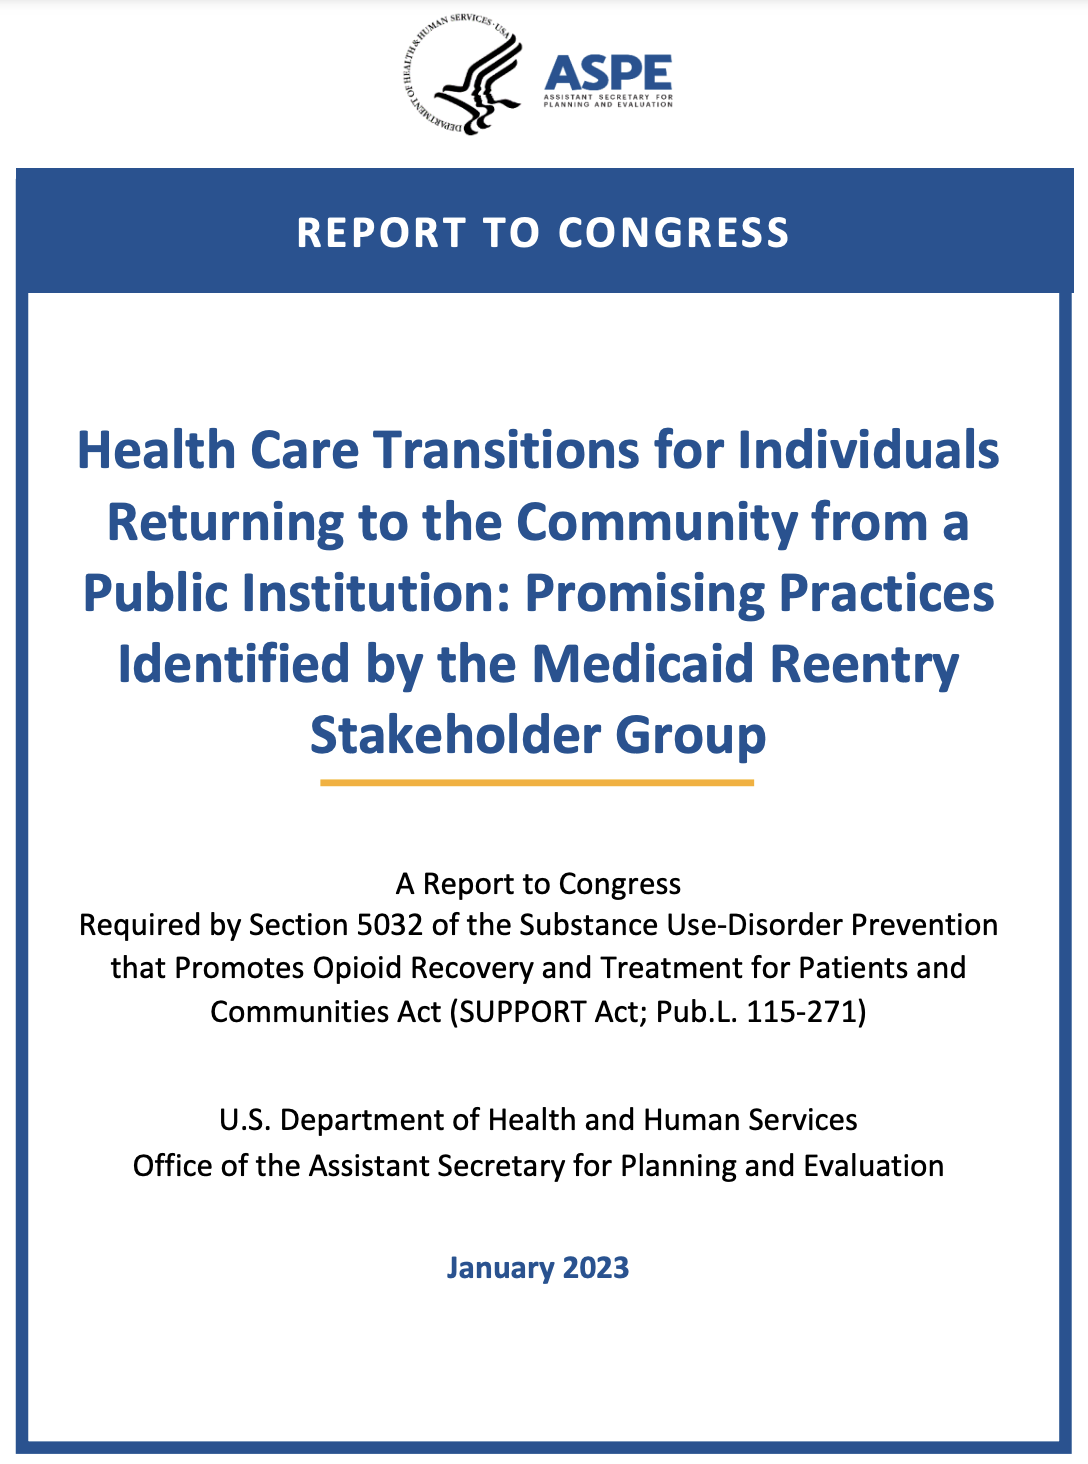 Health Care Transitions for Individuals Returning to the Community from a Public Institution